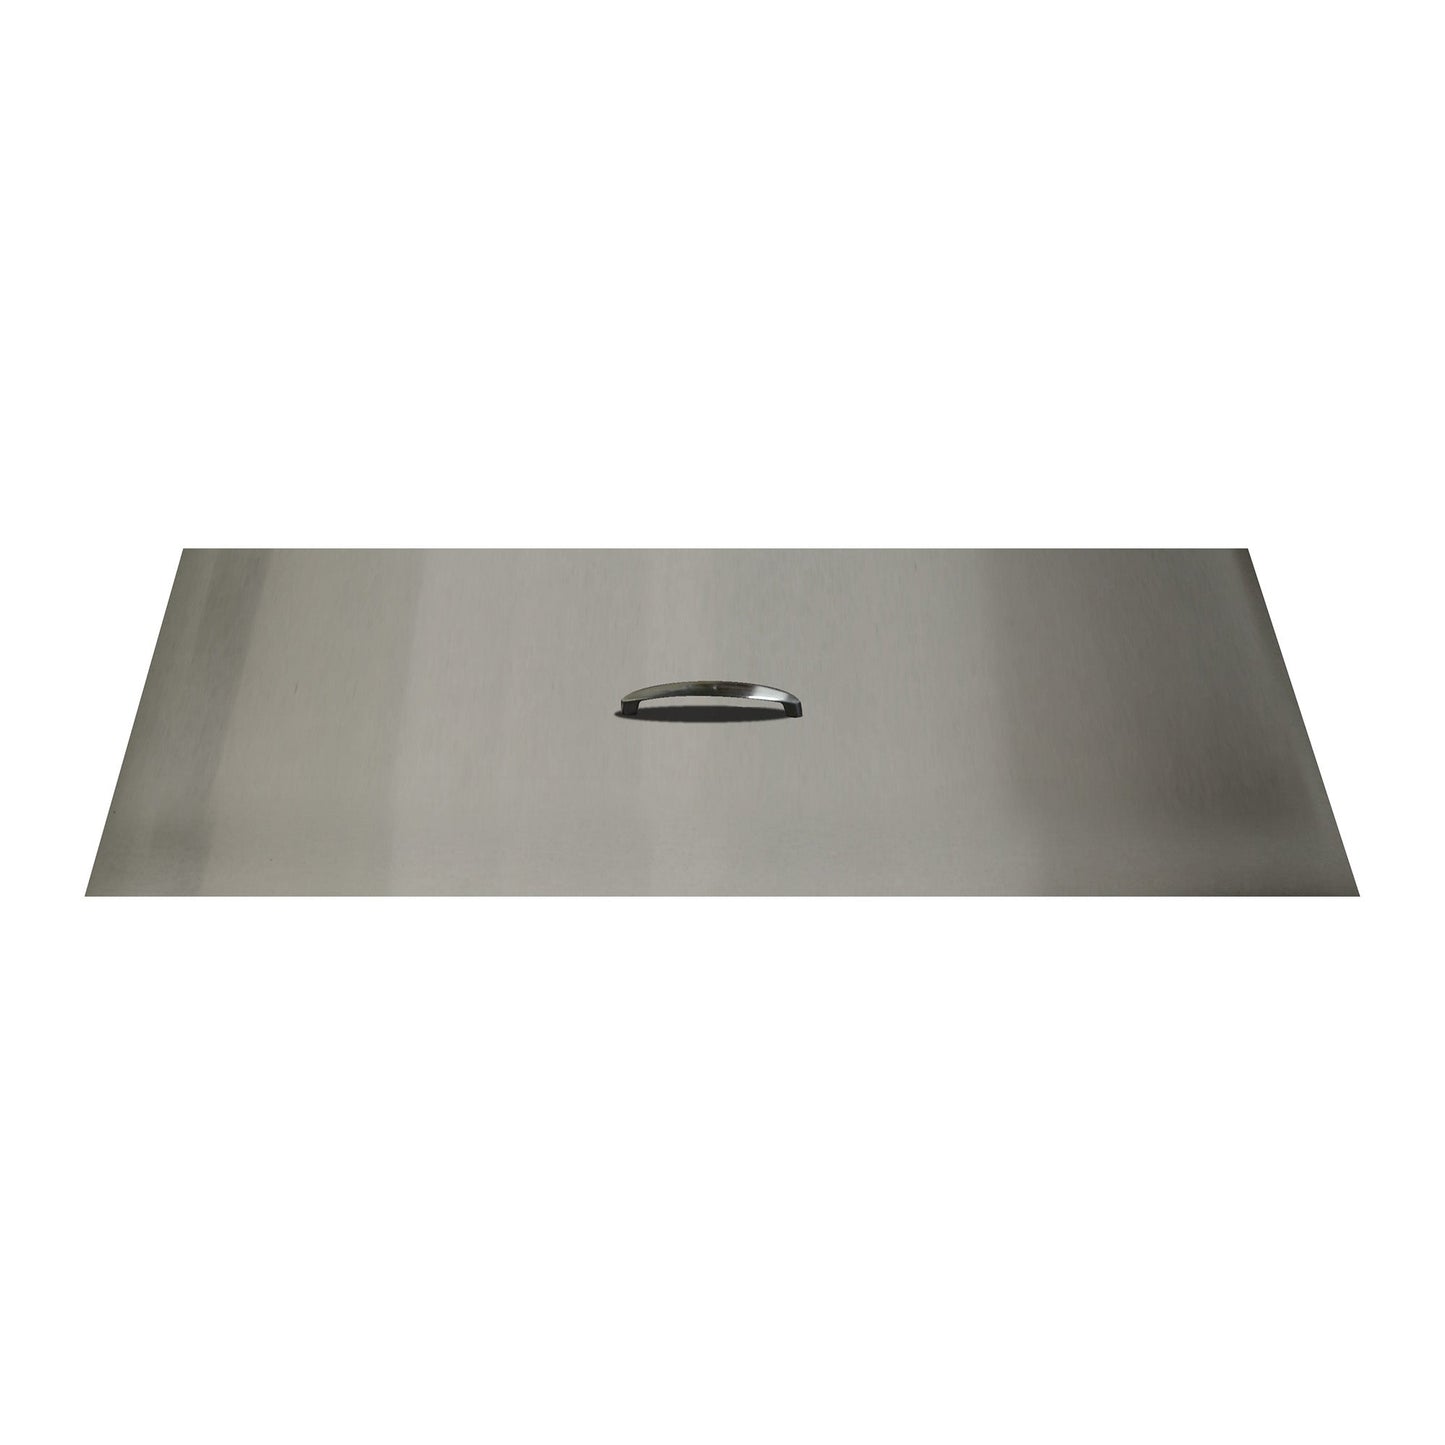 The Outdoor Plus 10" x 40" Stainless Steel Rectangular Fire Pit Lid Cover